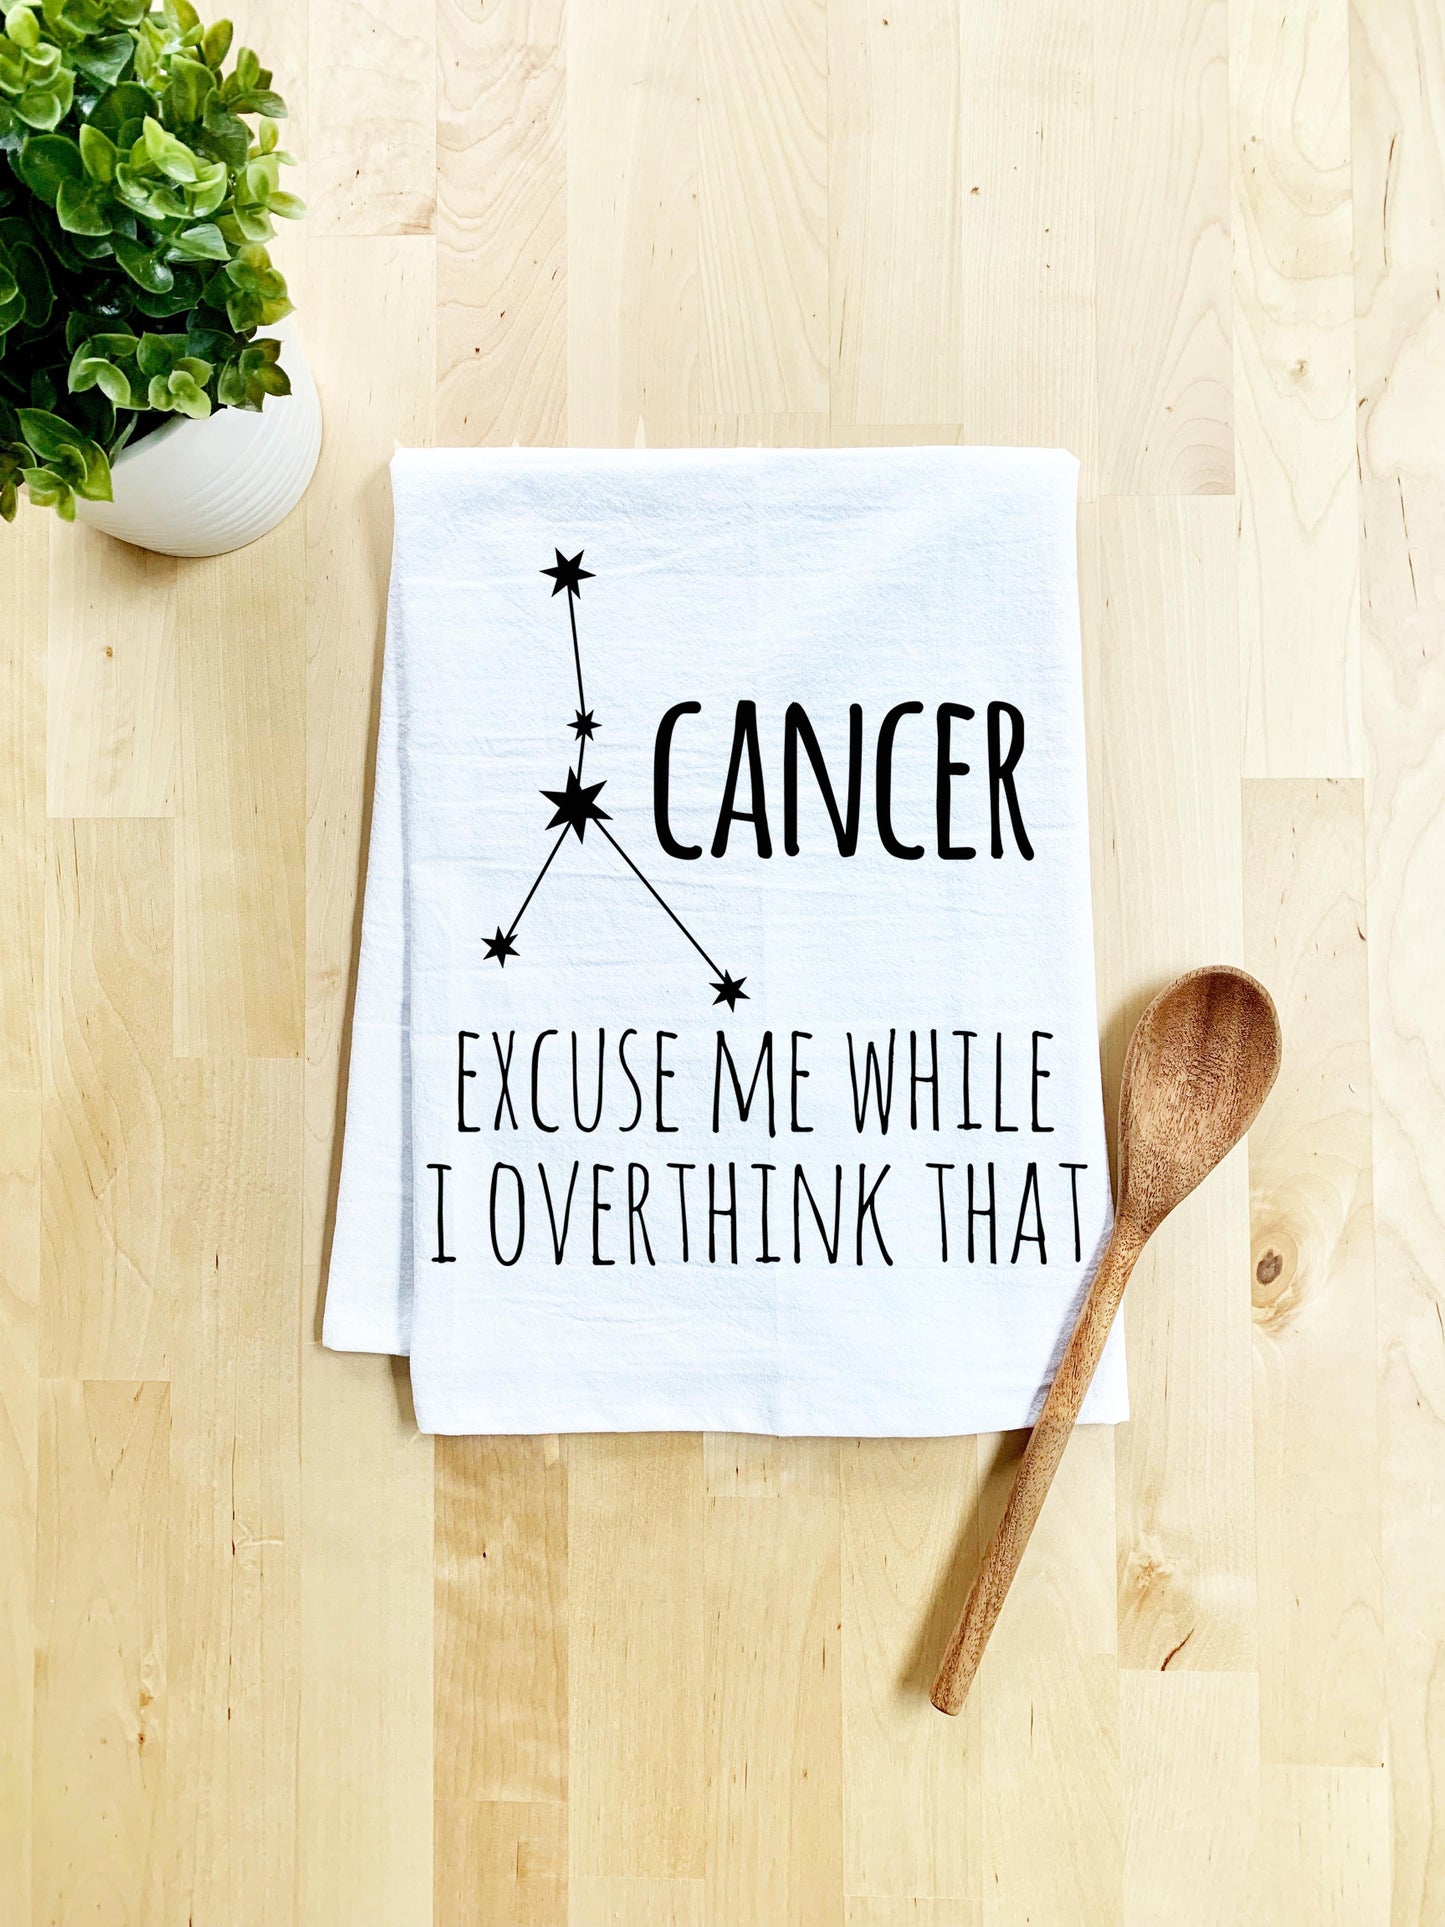 Cancer Zodiac (Excuse Me While I Overthink That) Dish Towel - White Or Gray - MoonlightMakers